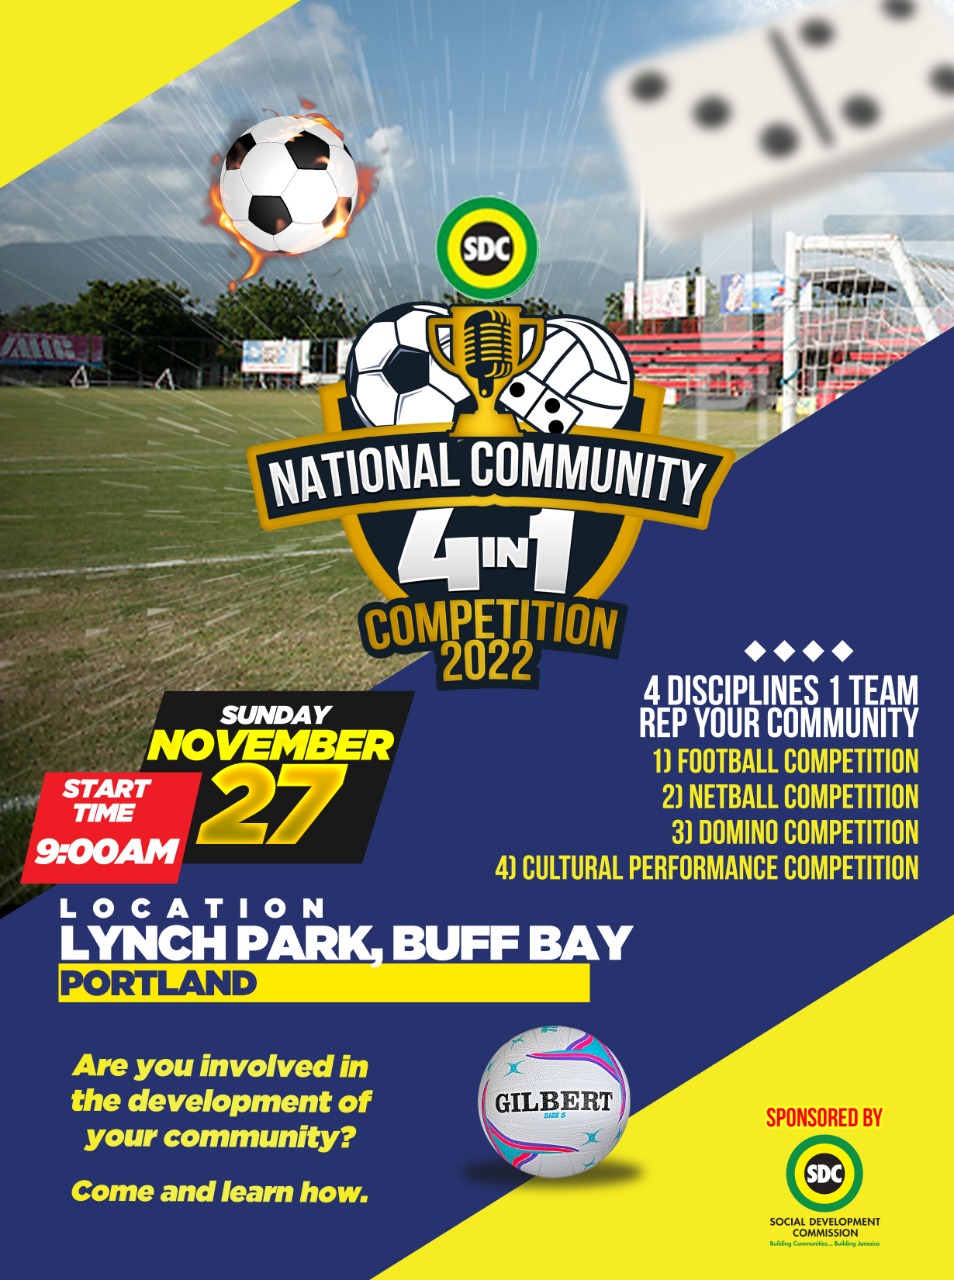 SDC National Community 4 in 1 Competition Social Development